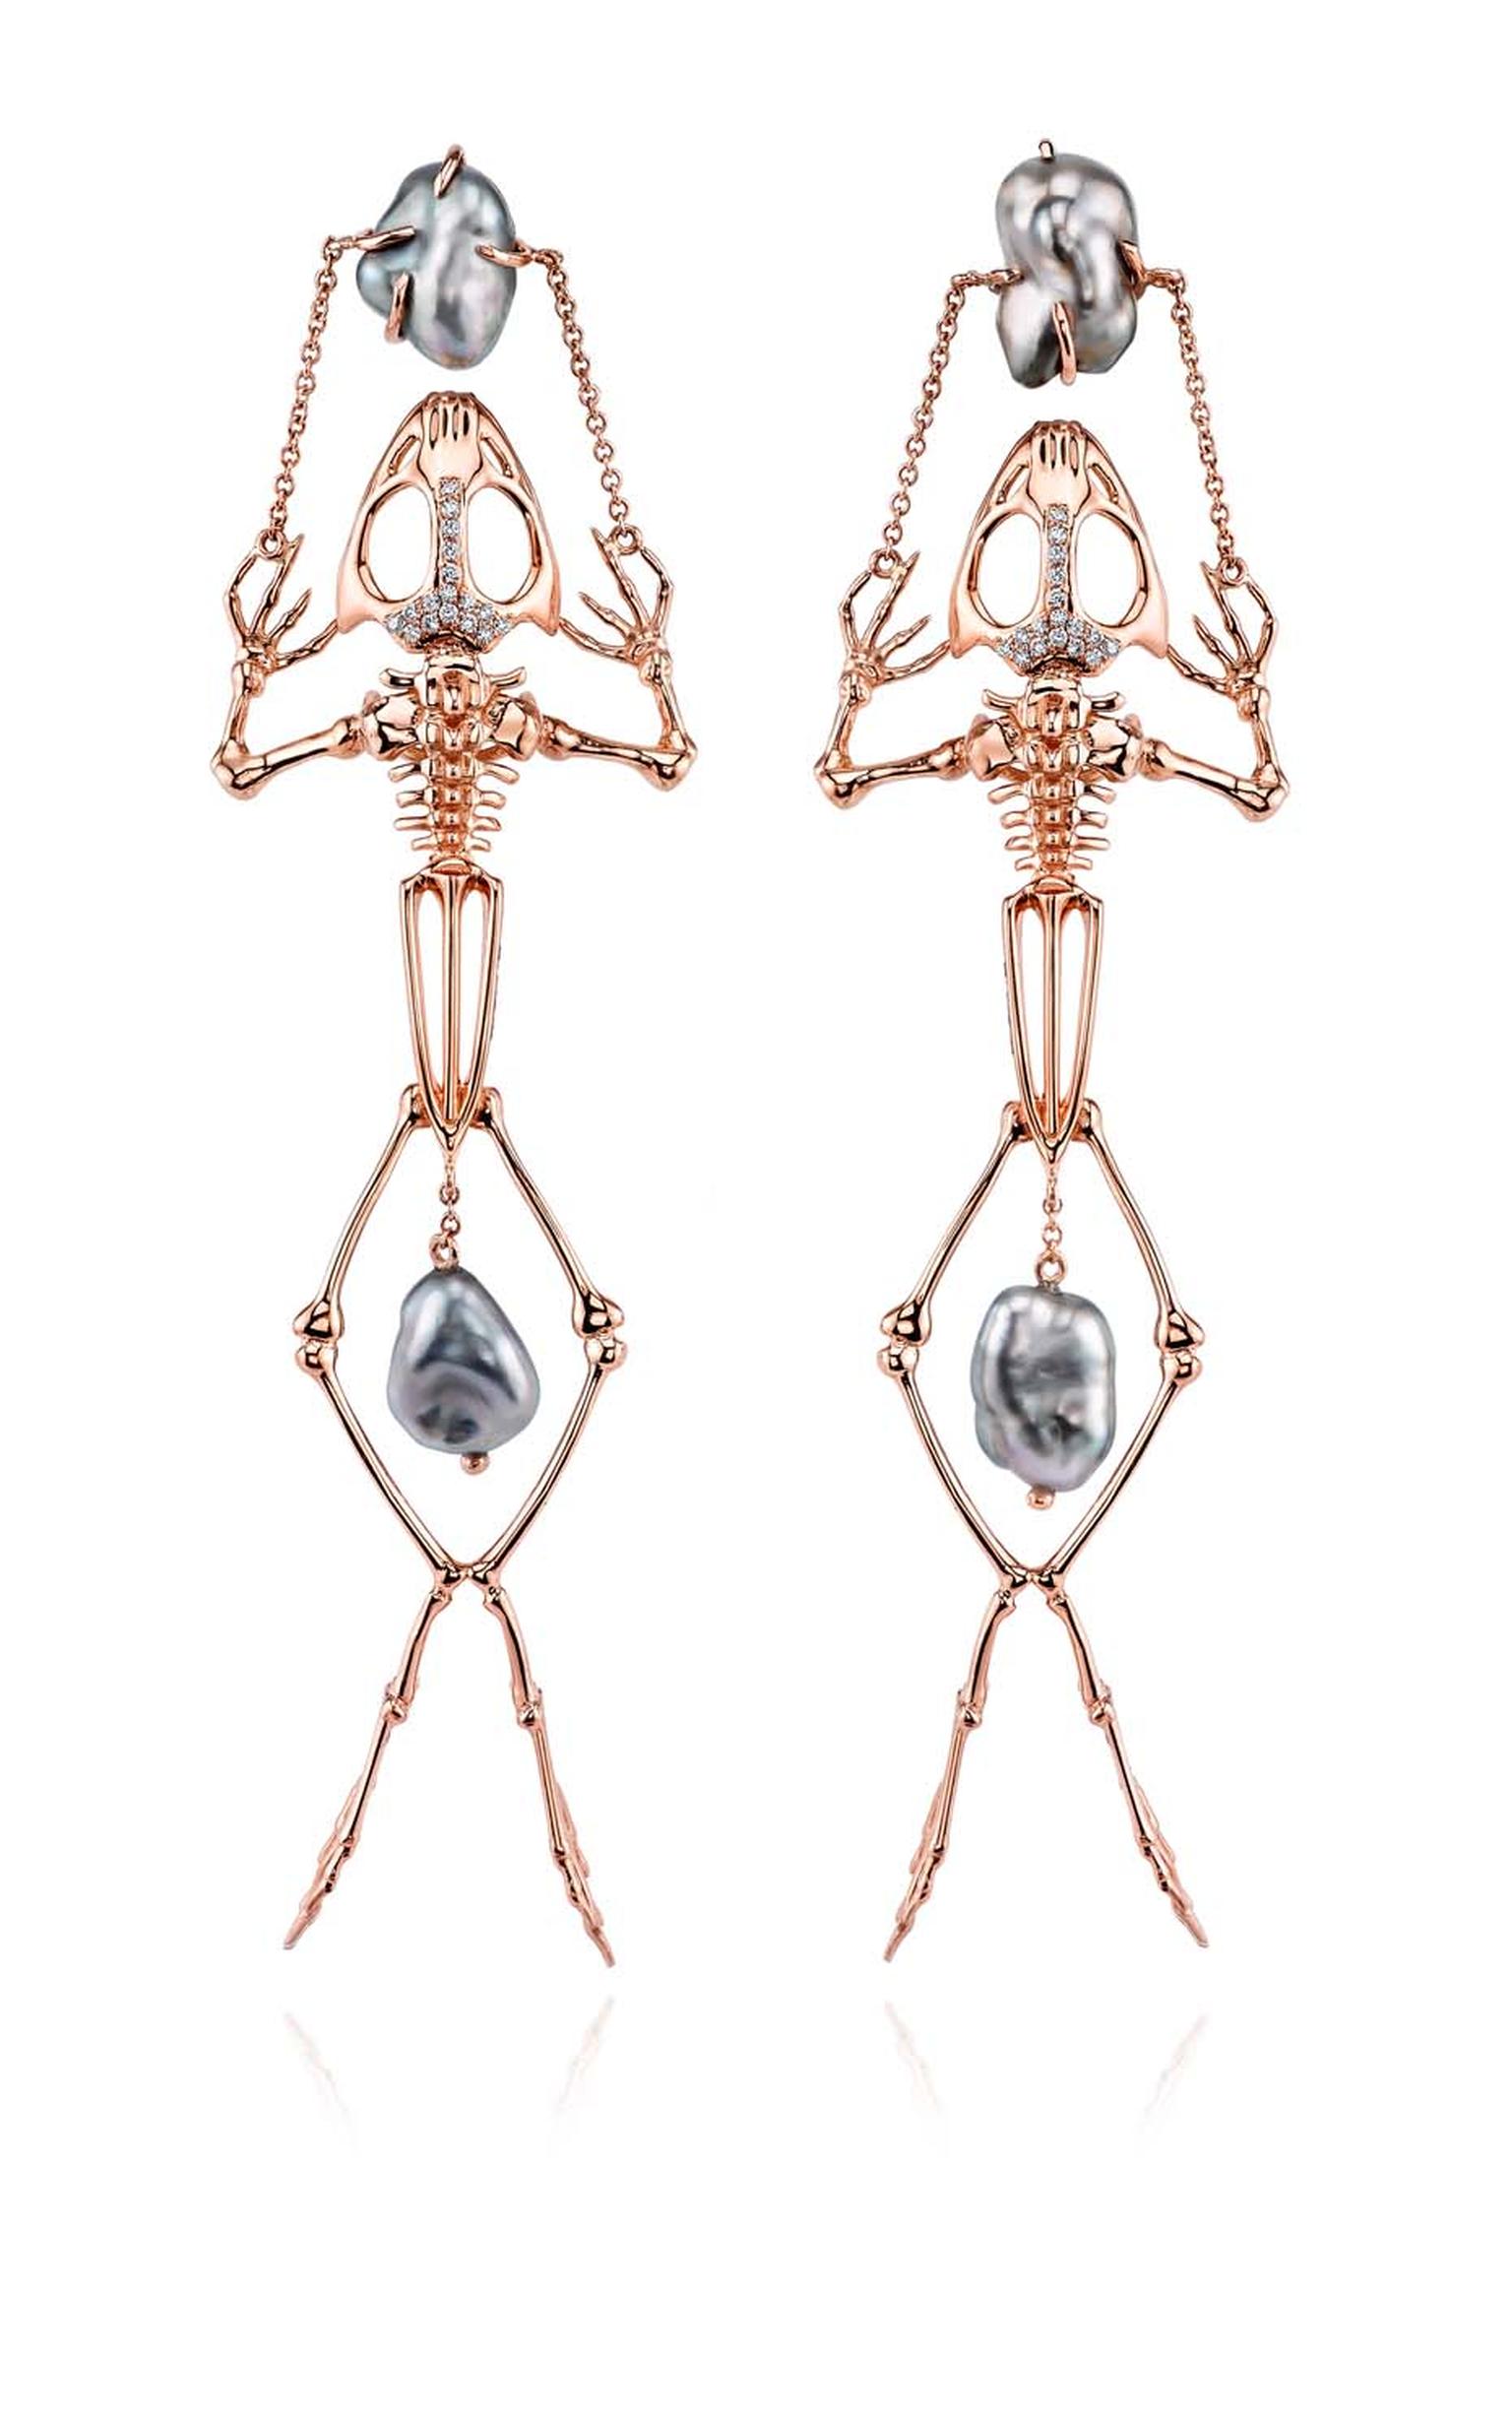 Daniela Villegas Rebirth collection Frog Skeleton earrings in rose gold with white diamonds and Keshi pearls.